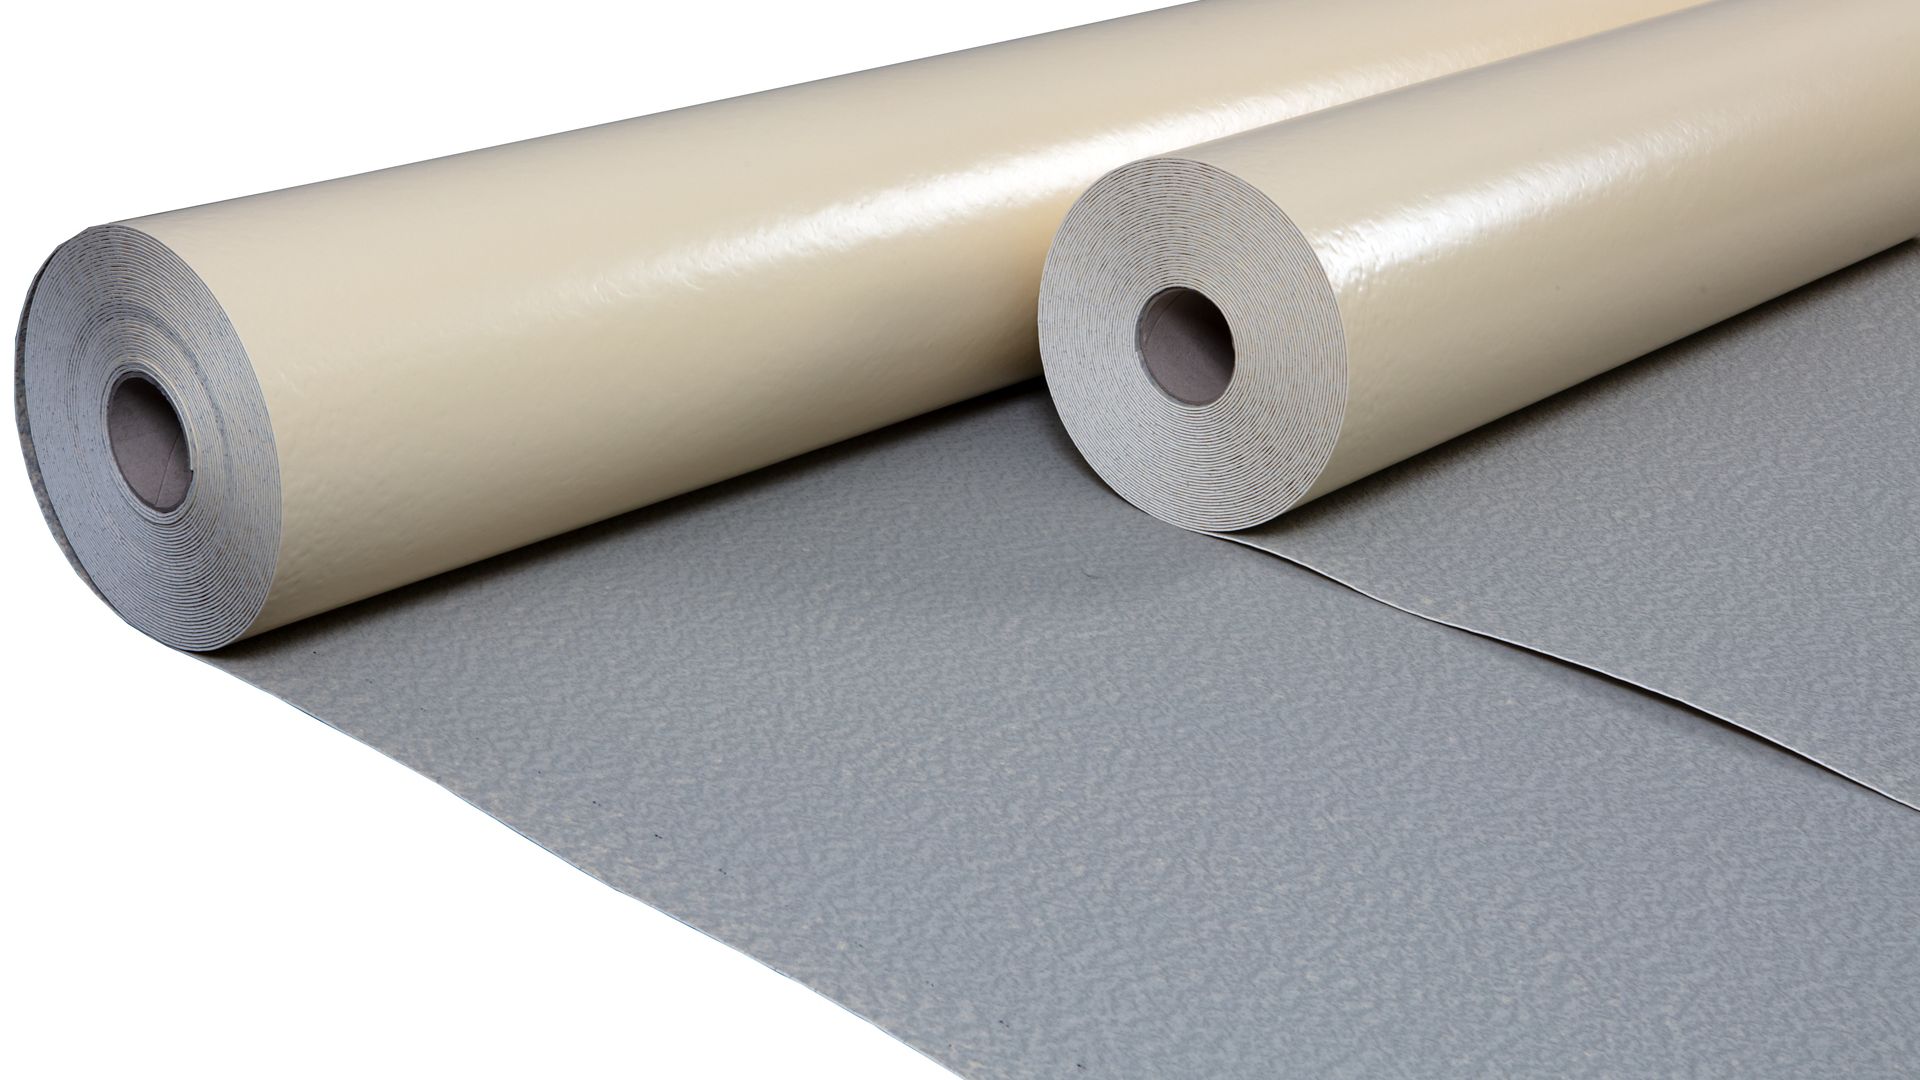 2 rolls of waterproofing membrane from Sika - SikaProof® A+ 08 12